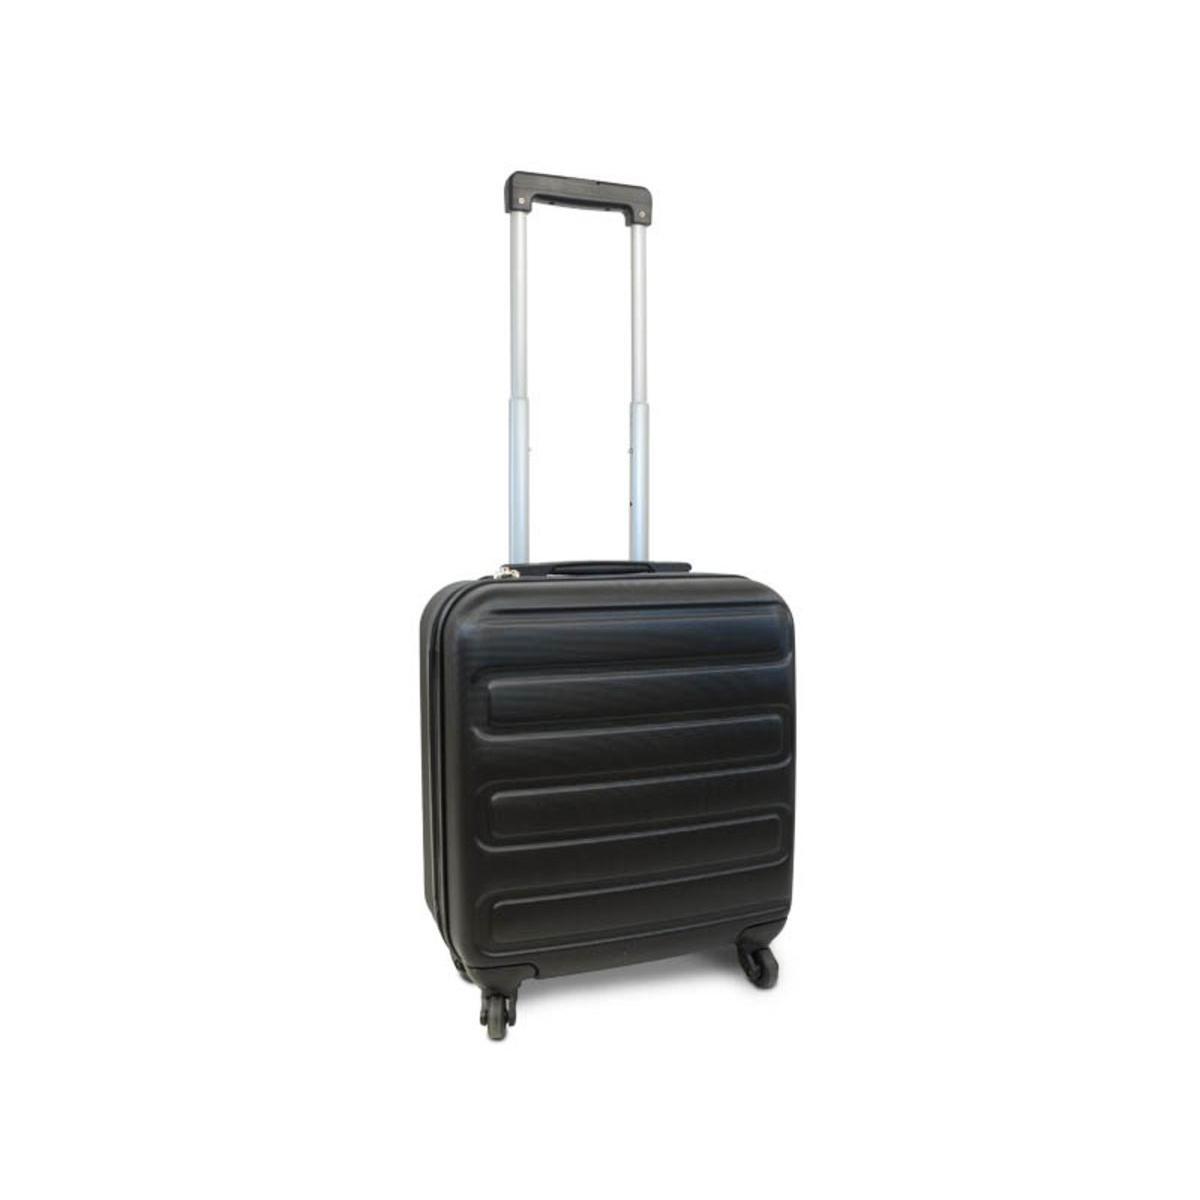 VALISE CAB ABS LOW COST NOIR